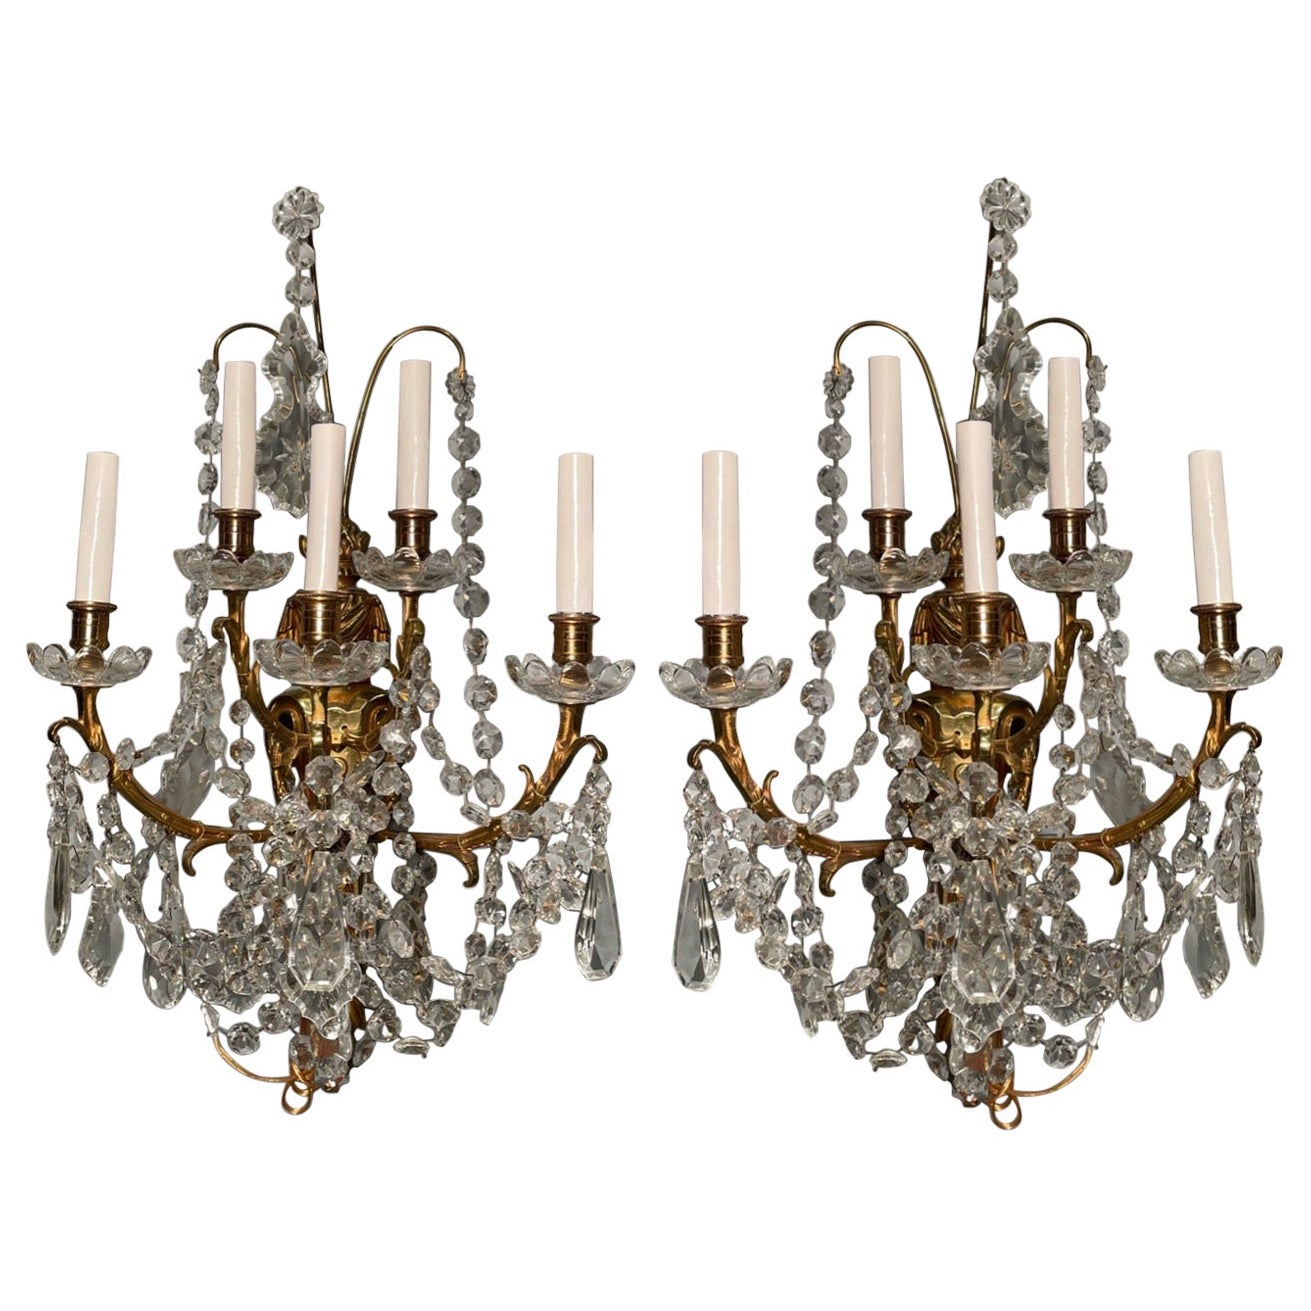 Pair of Antique French Crystal Five Light Sconces